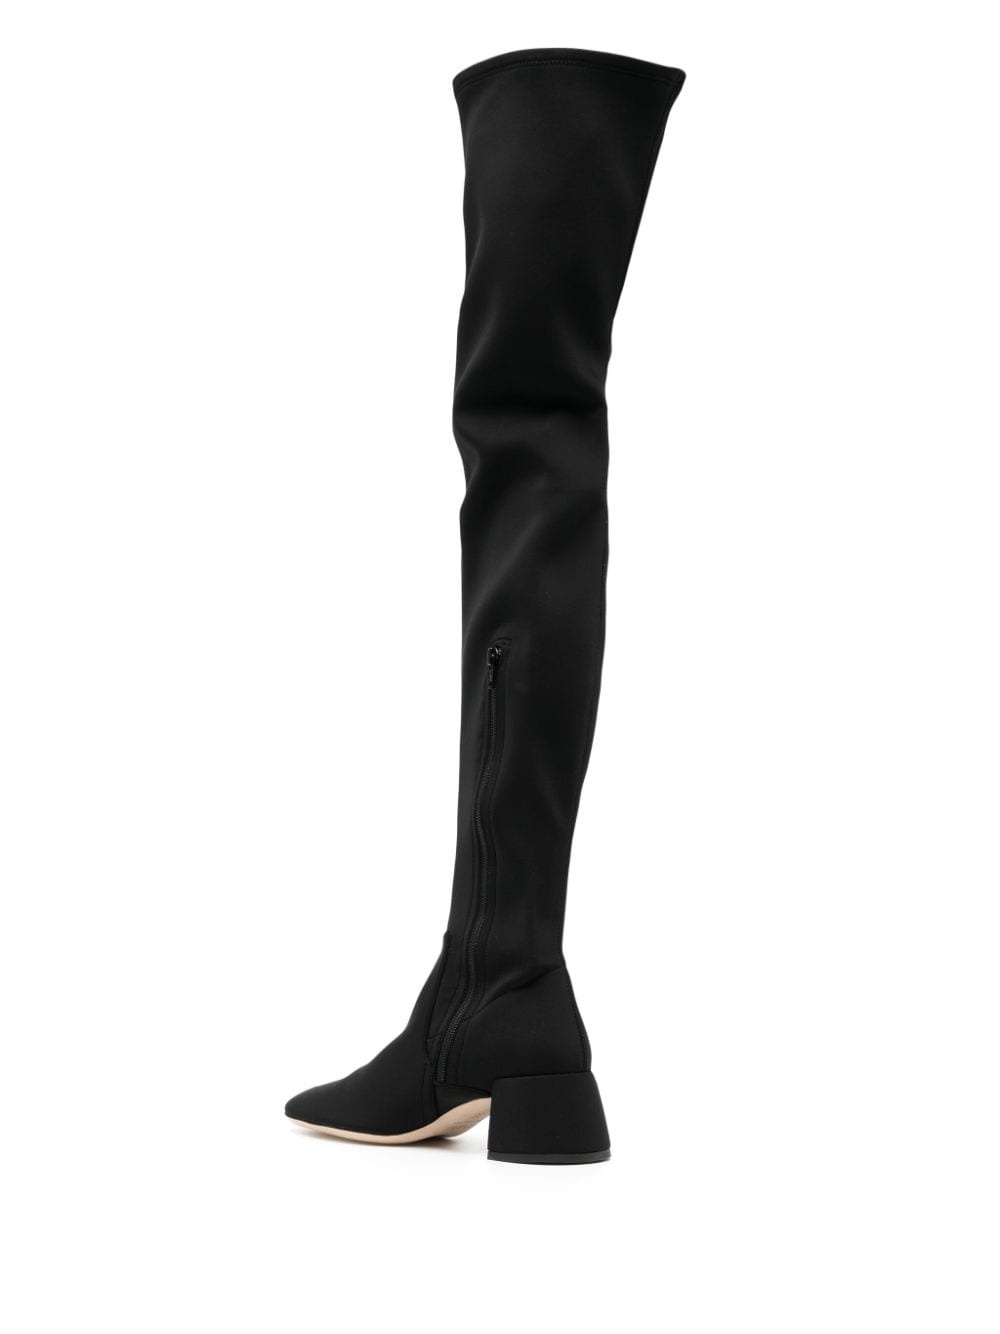 55mm over-the-knee boots - 3